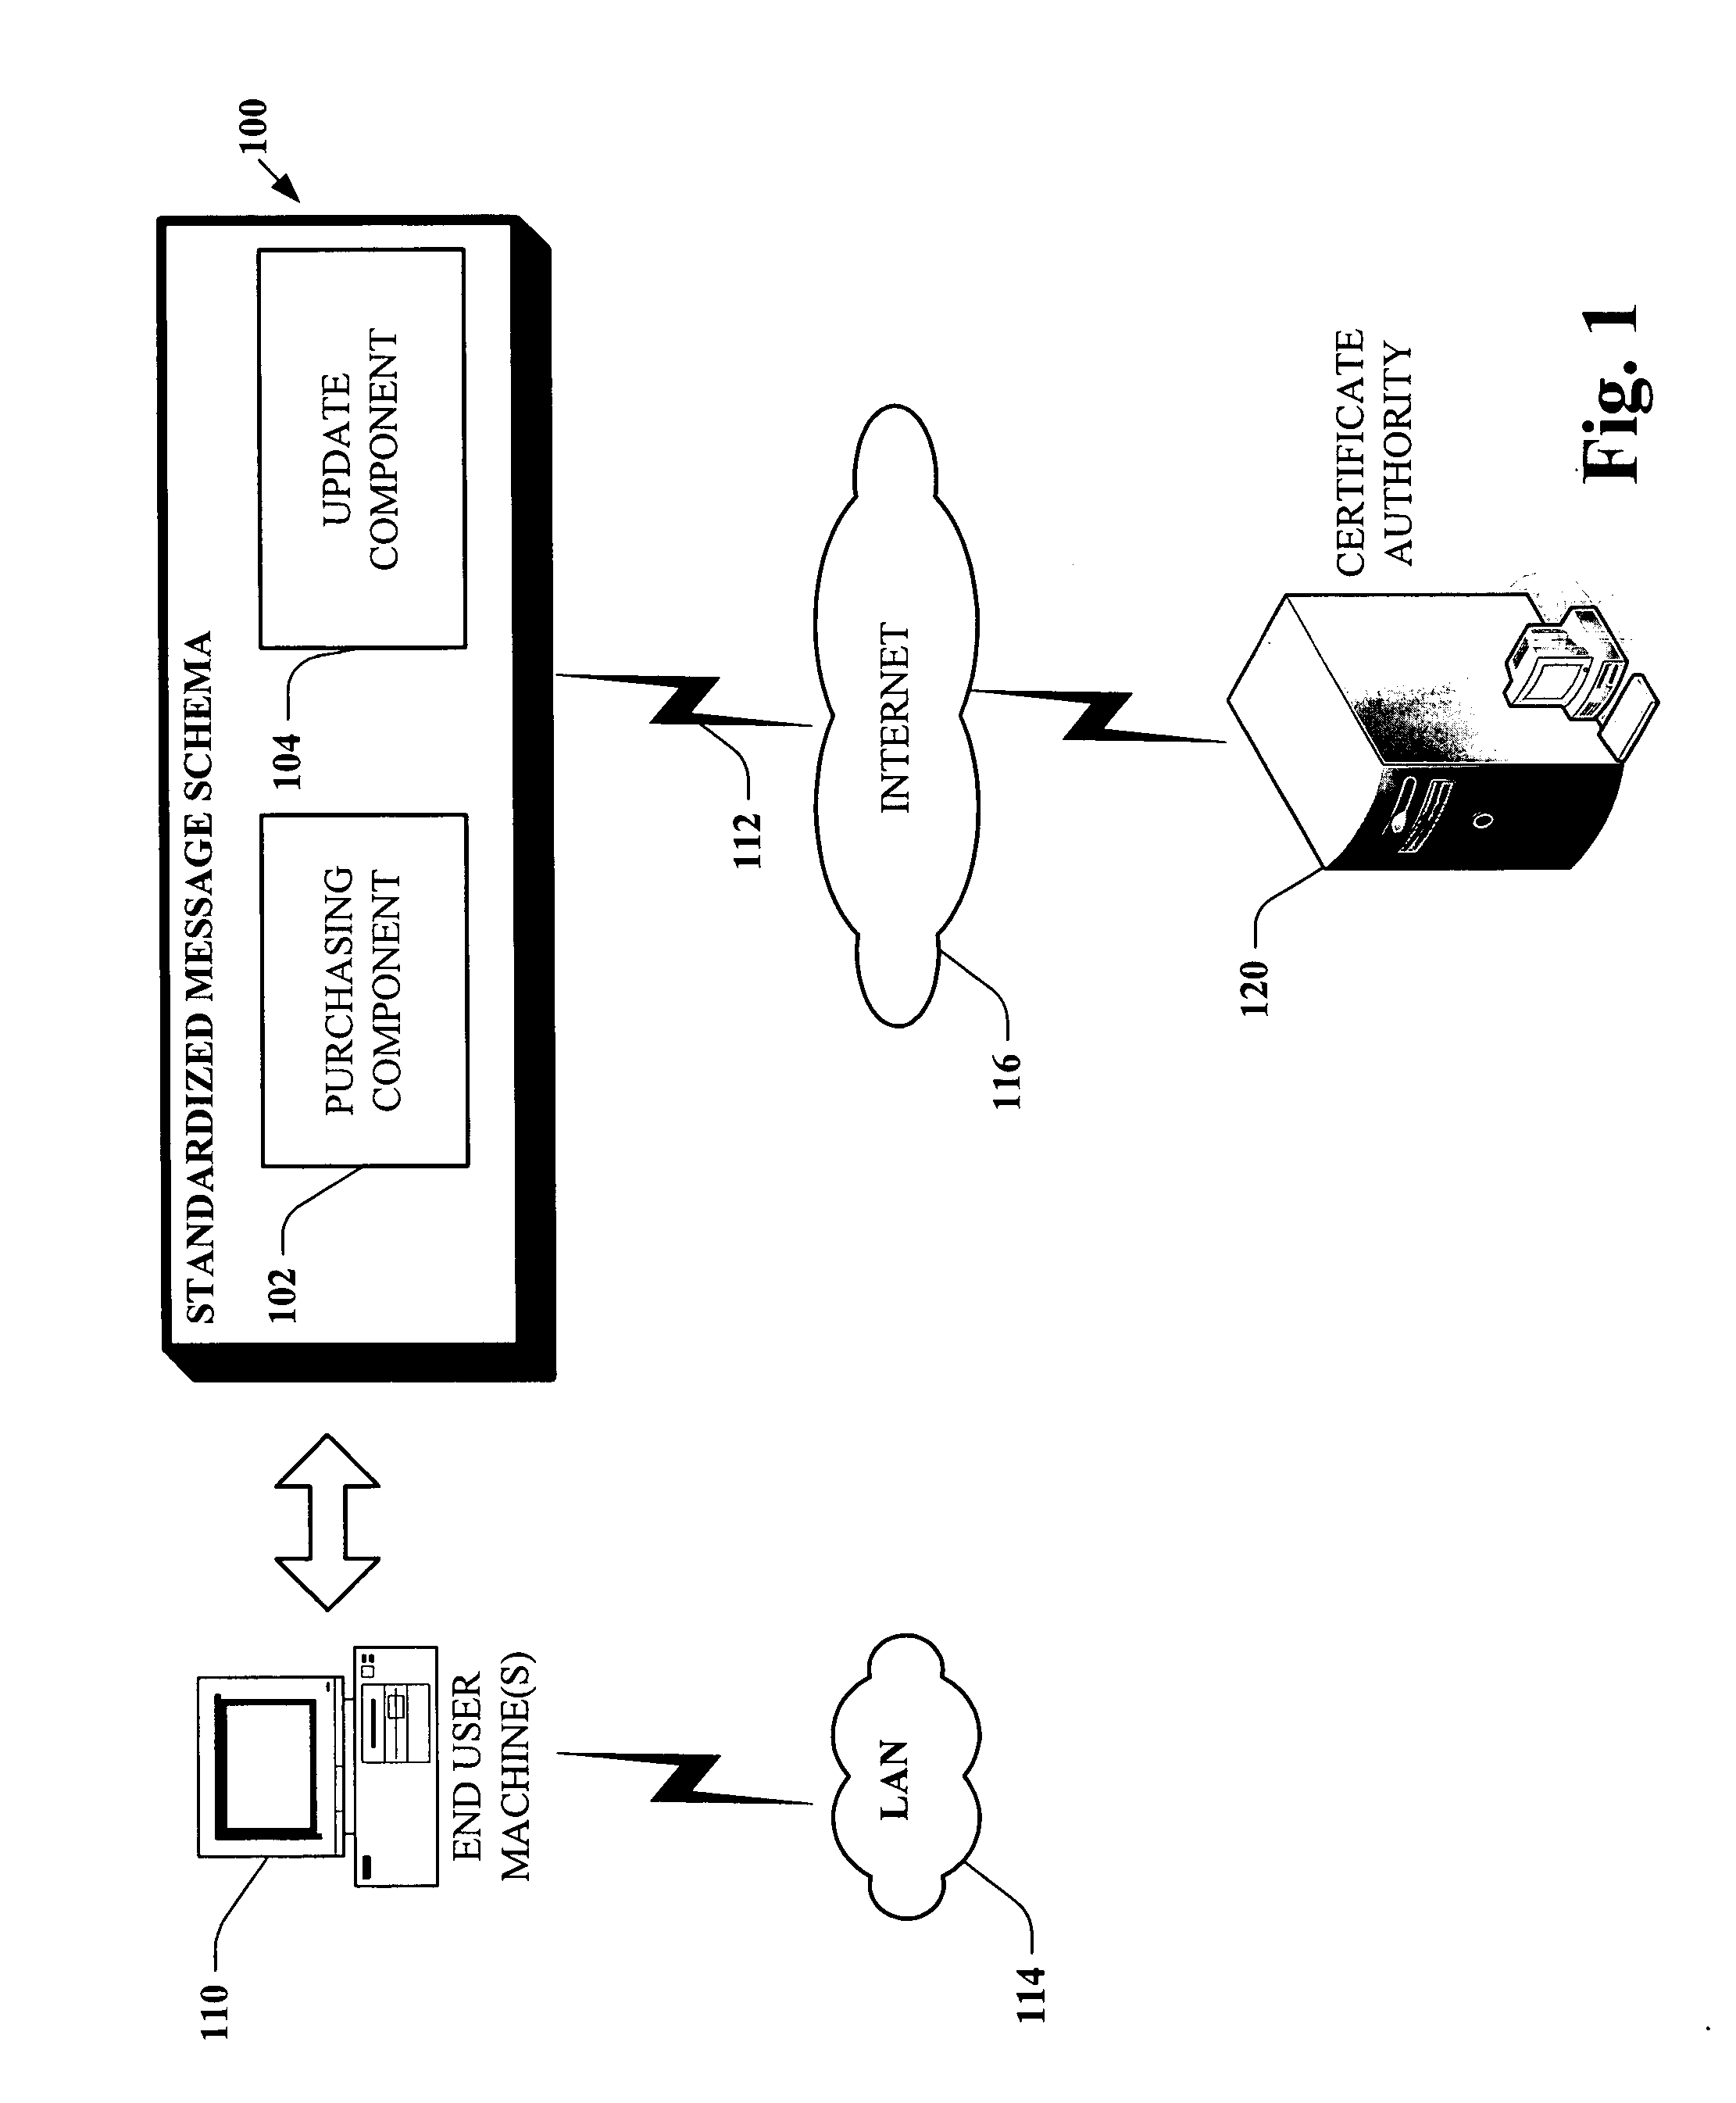 Message based network configuration of server certificate purchase